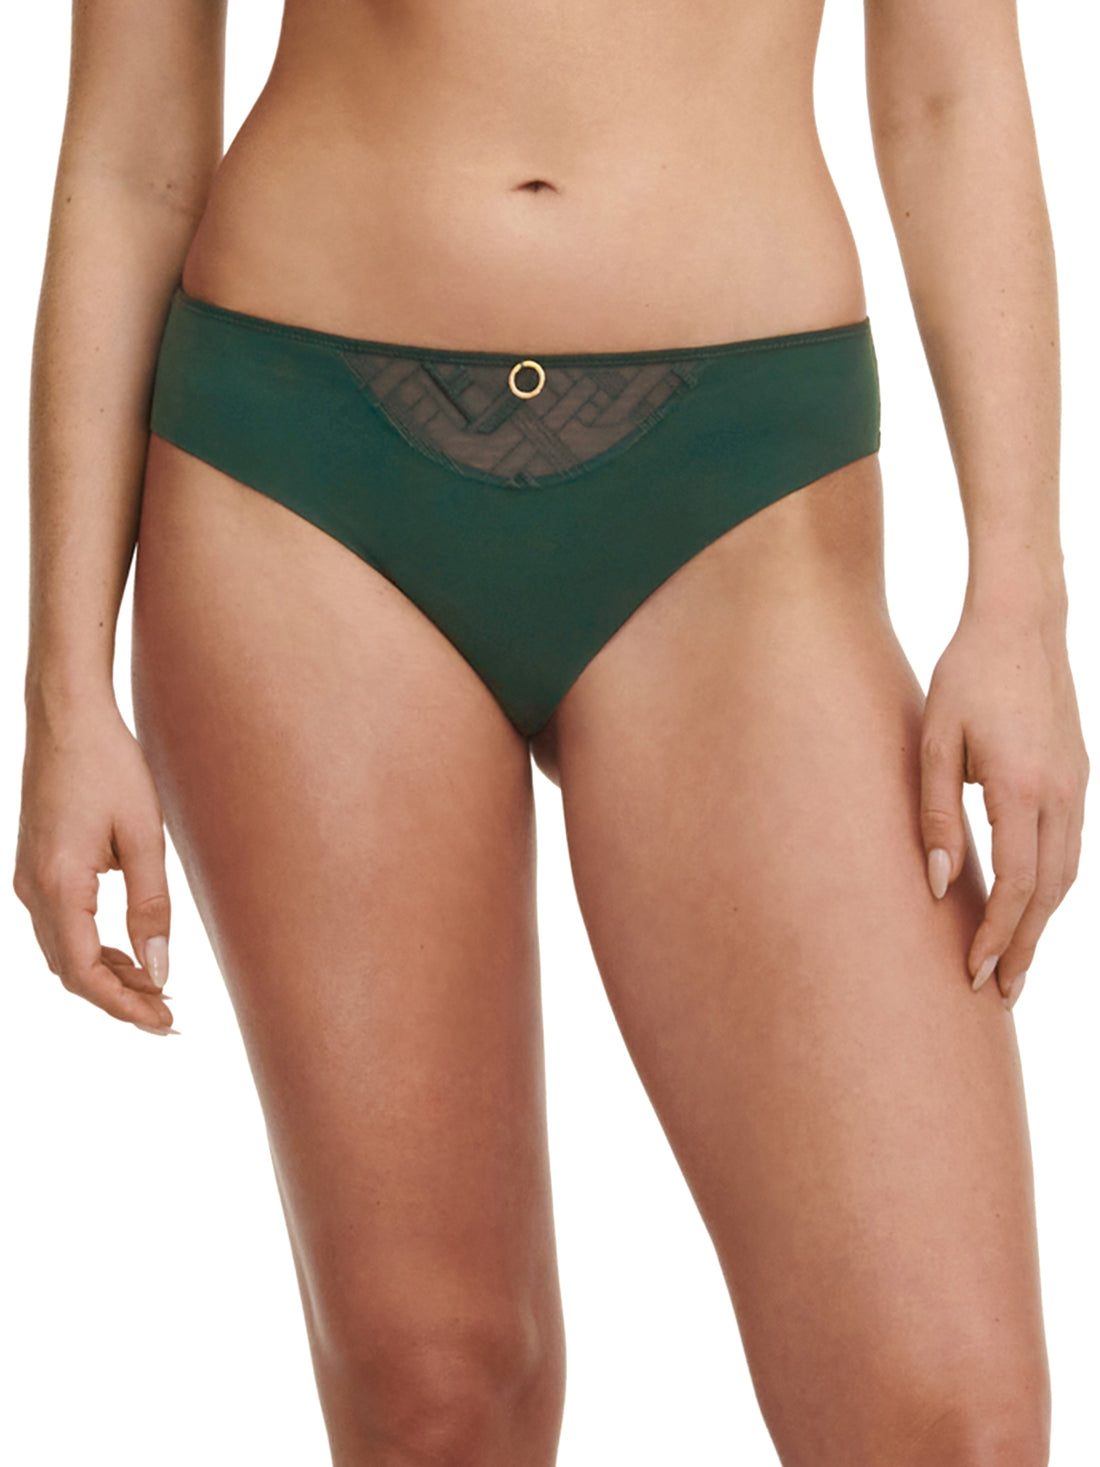 Chantelle - Graphic Support Brief in Green